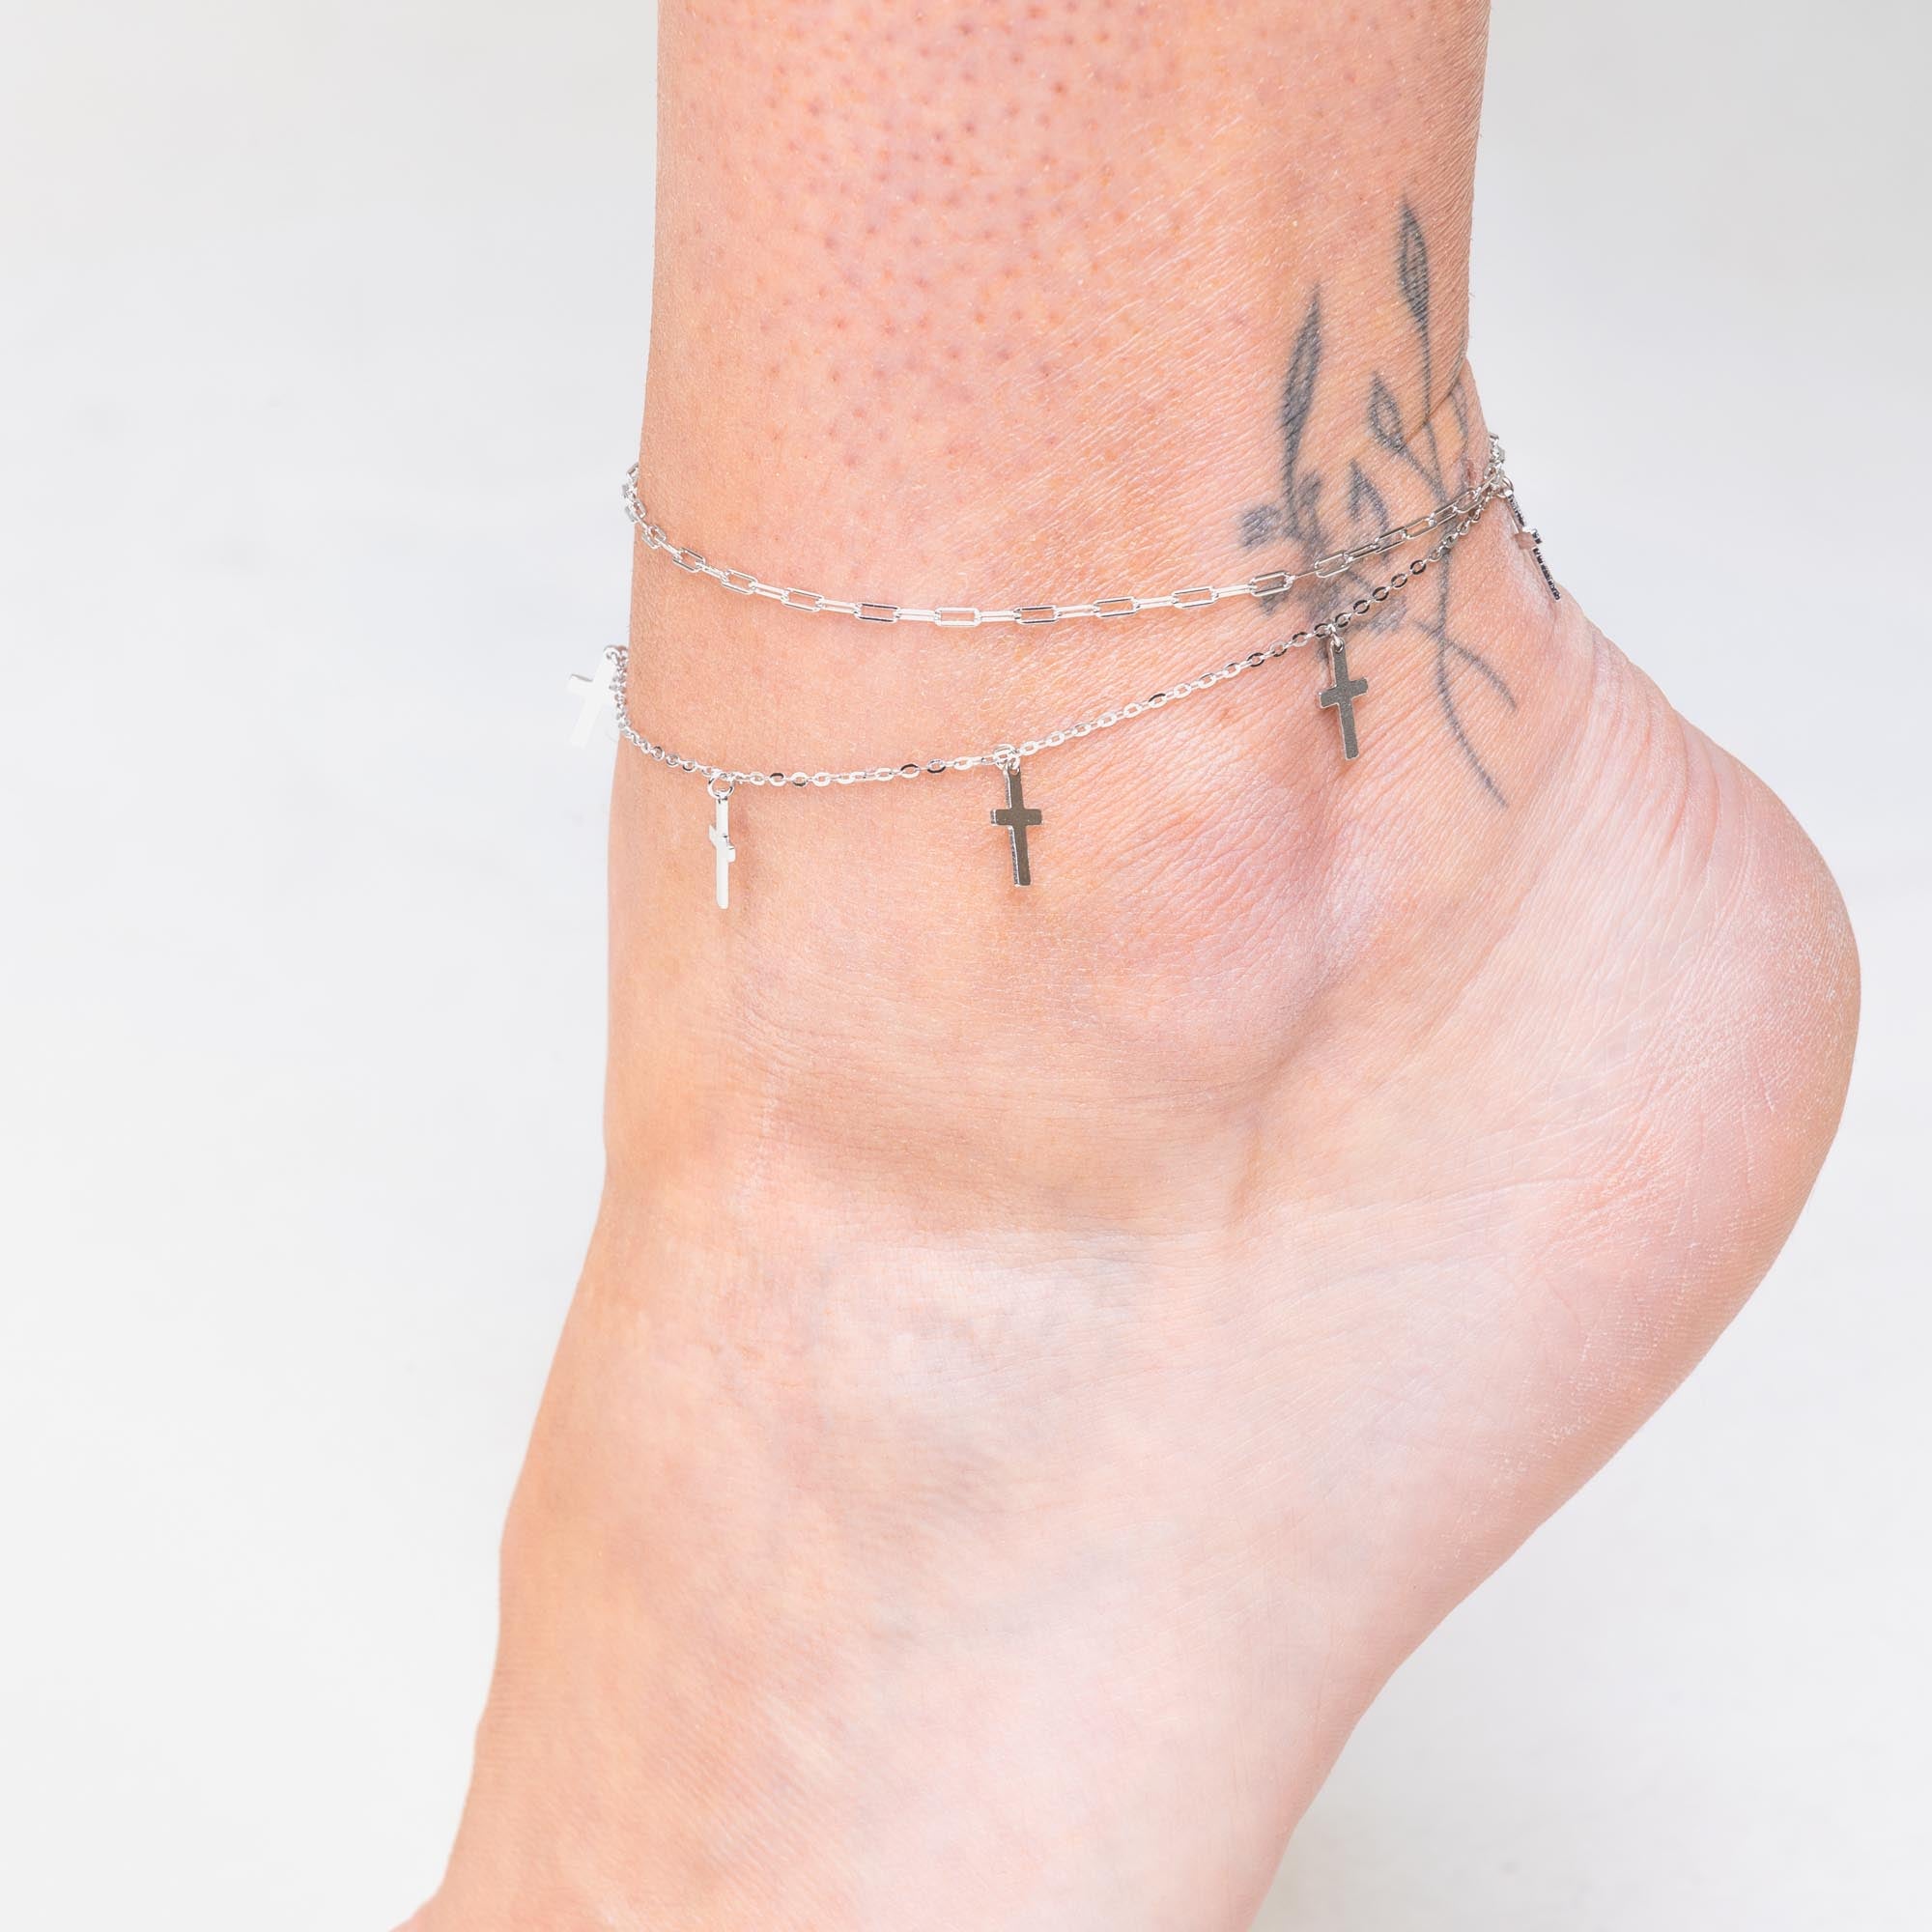 Cross Dangling Chain Anklet